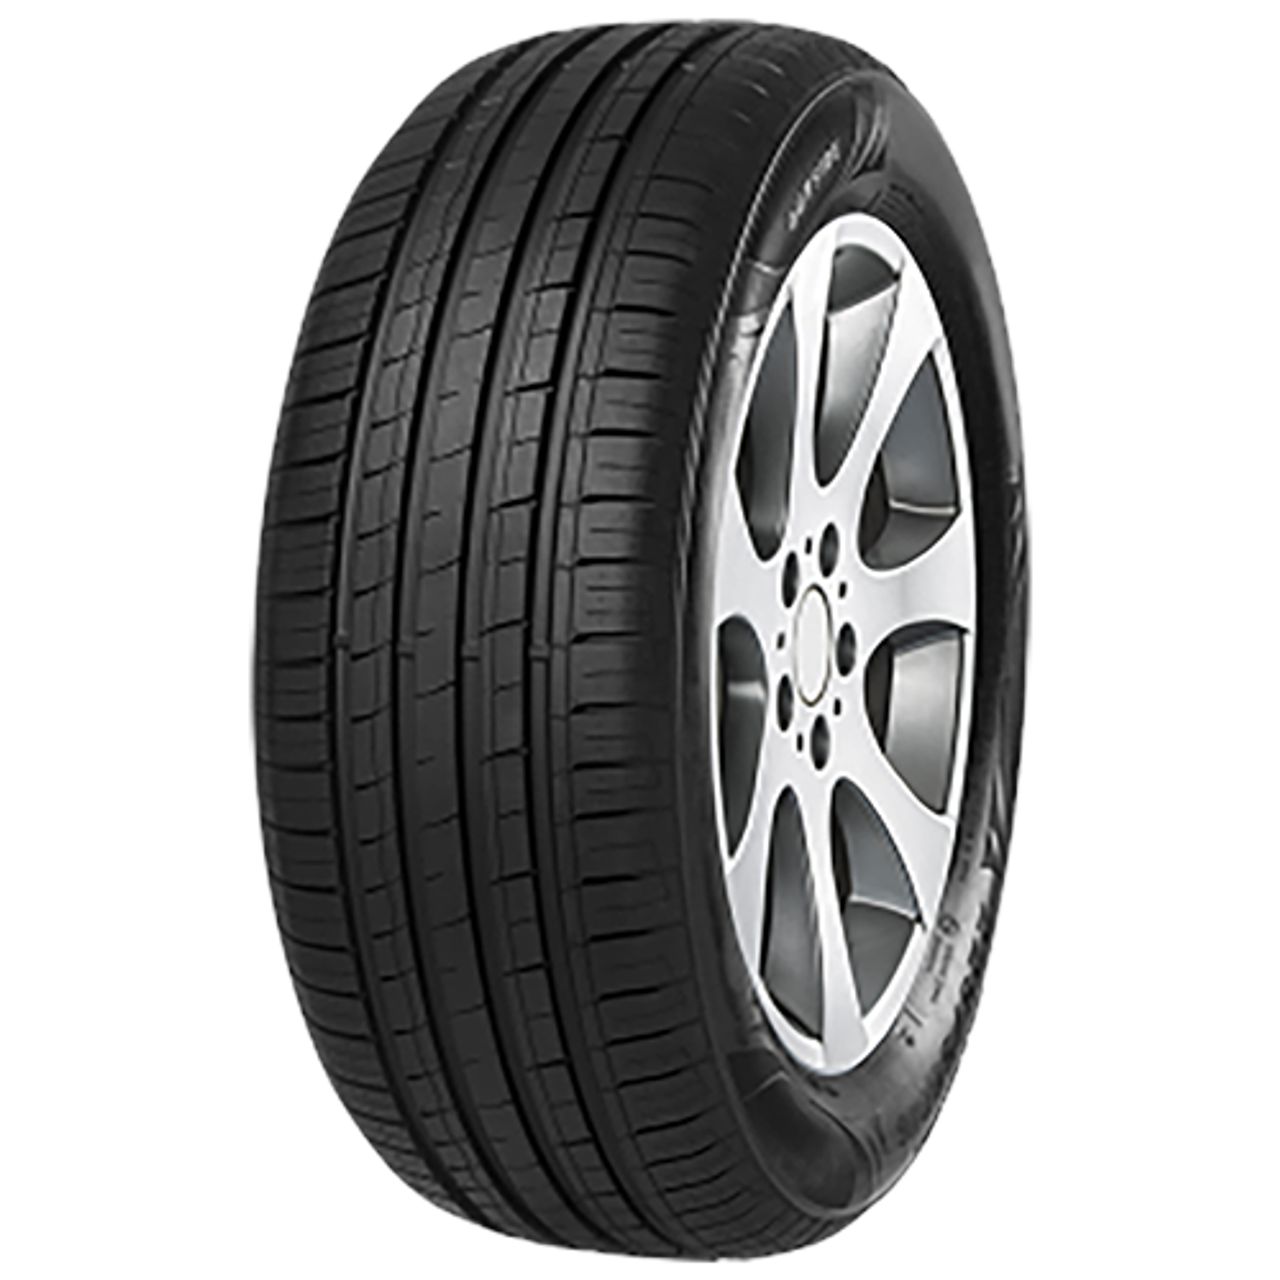 IMPERIAL ECODRIVER 5 195/55R15 85H 